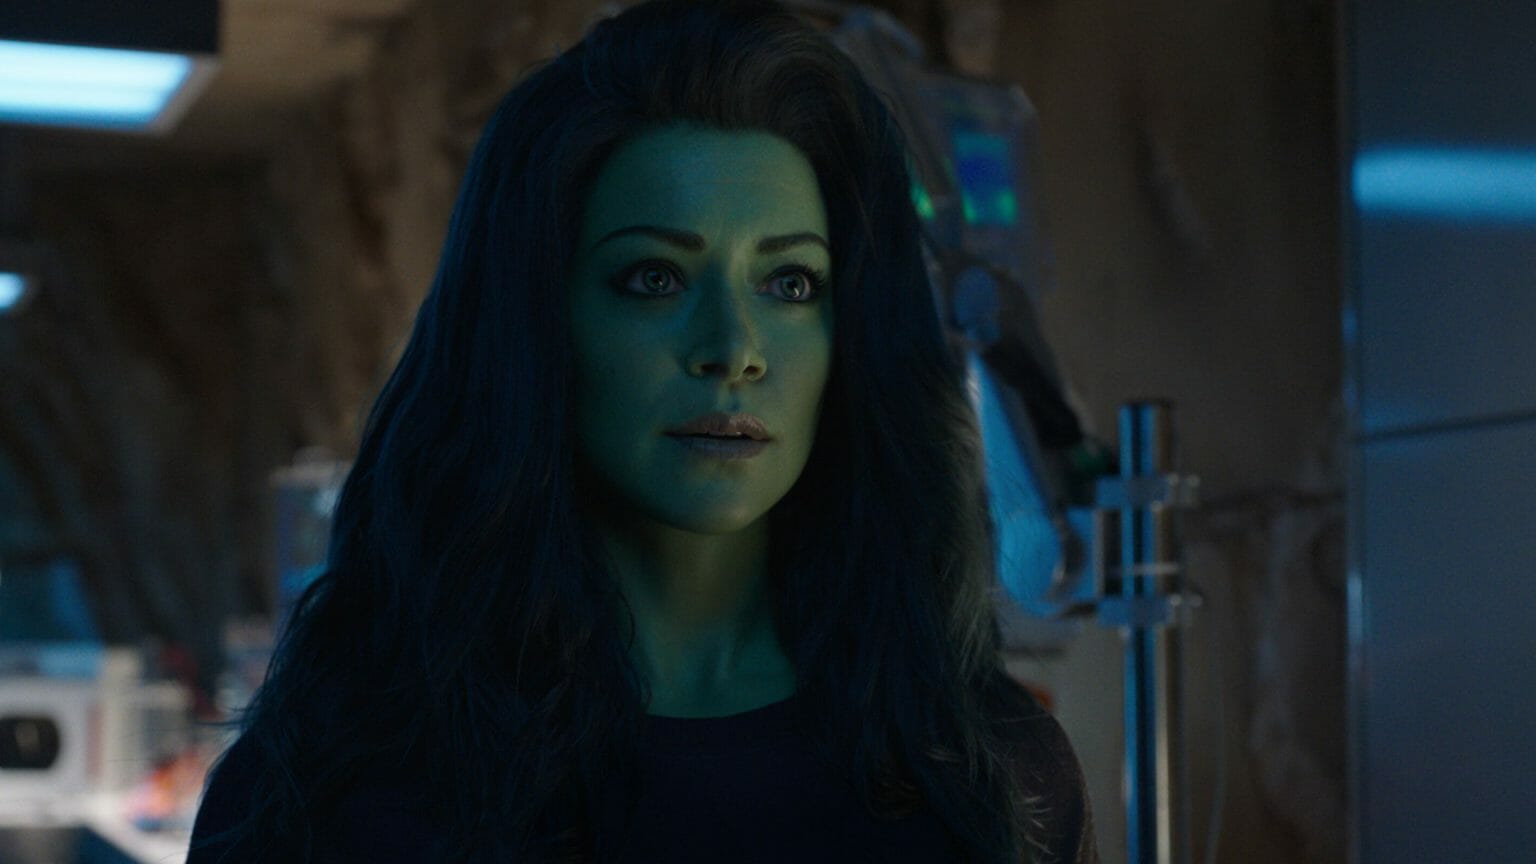 Jennifer Walters played by Tatiana Maslany tests her new powers in Bruce Banner's secret lab as seen in the Disney+ show.